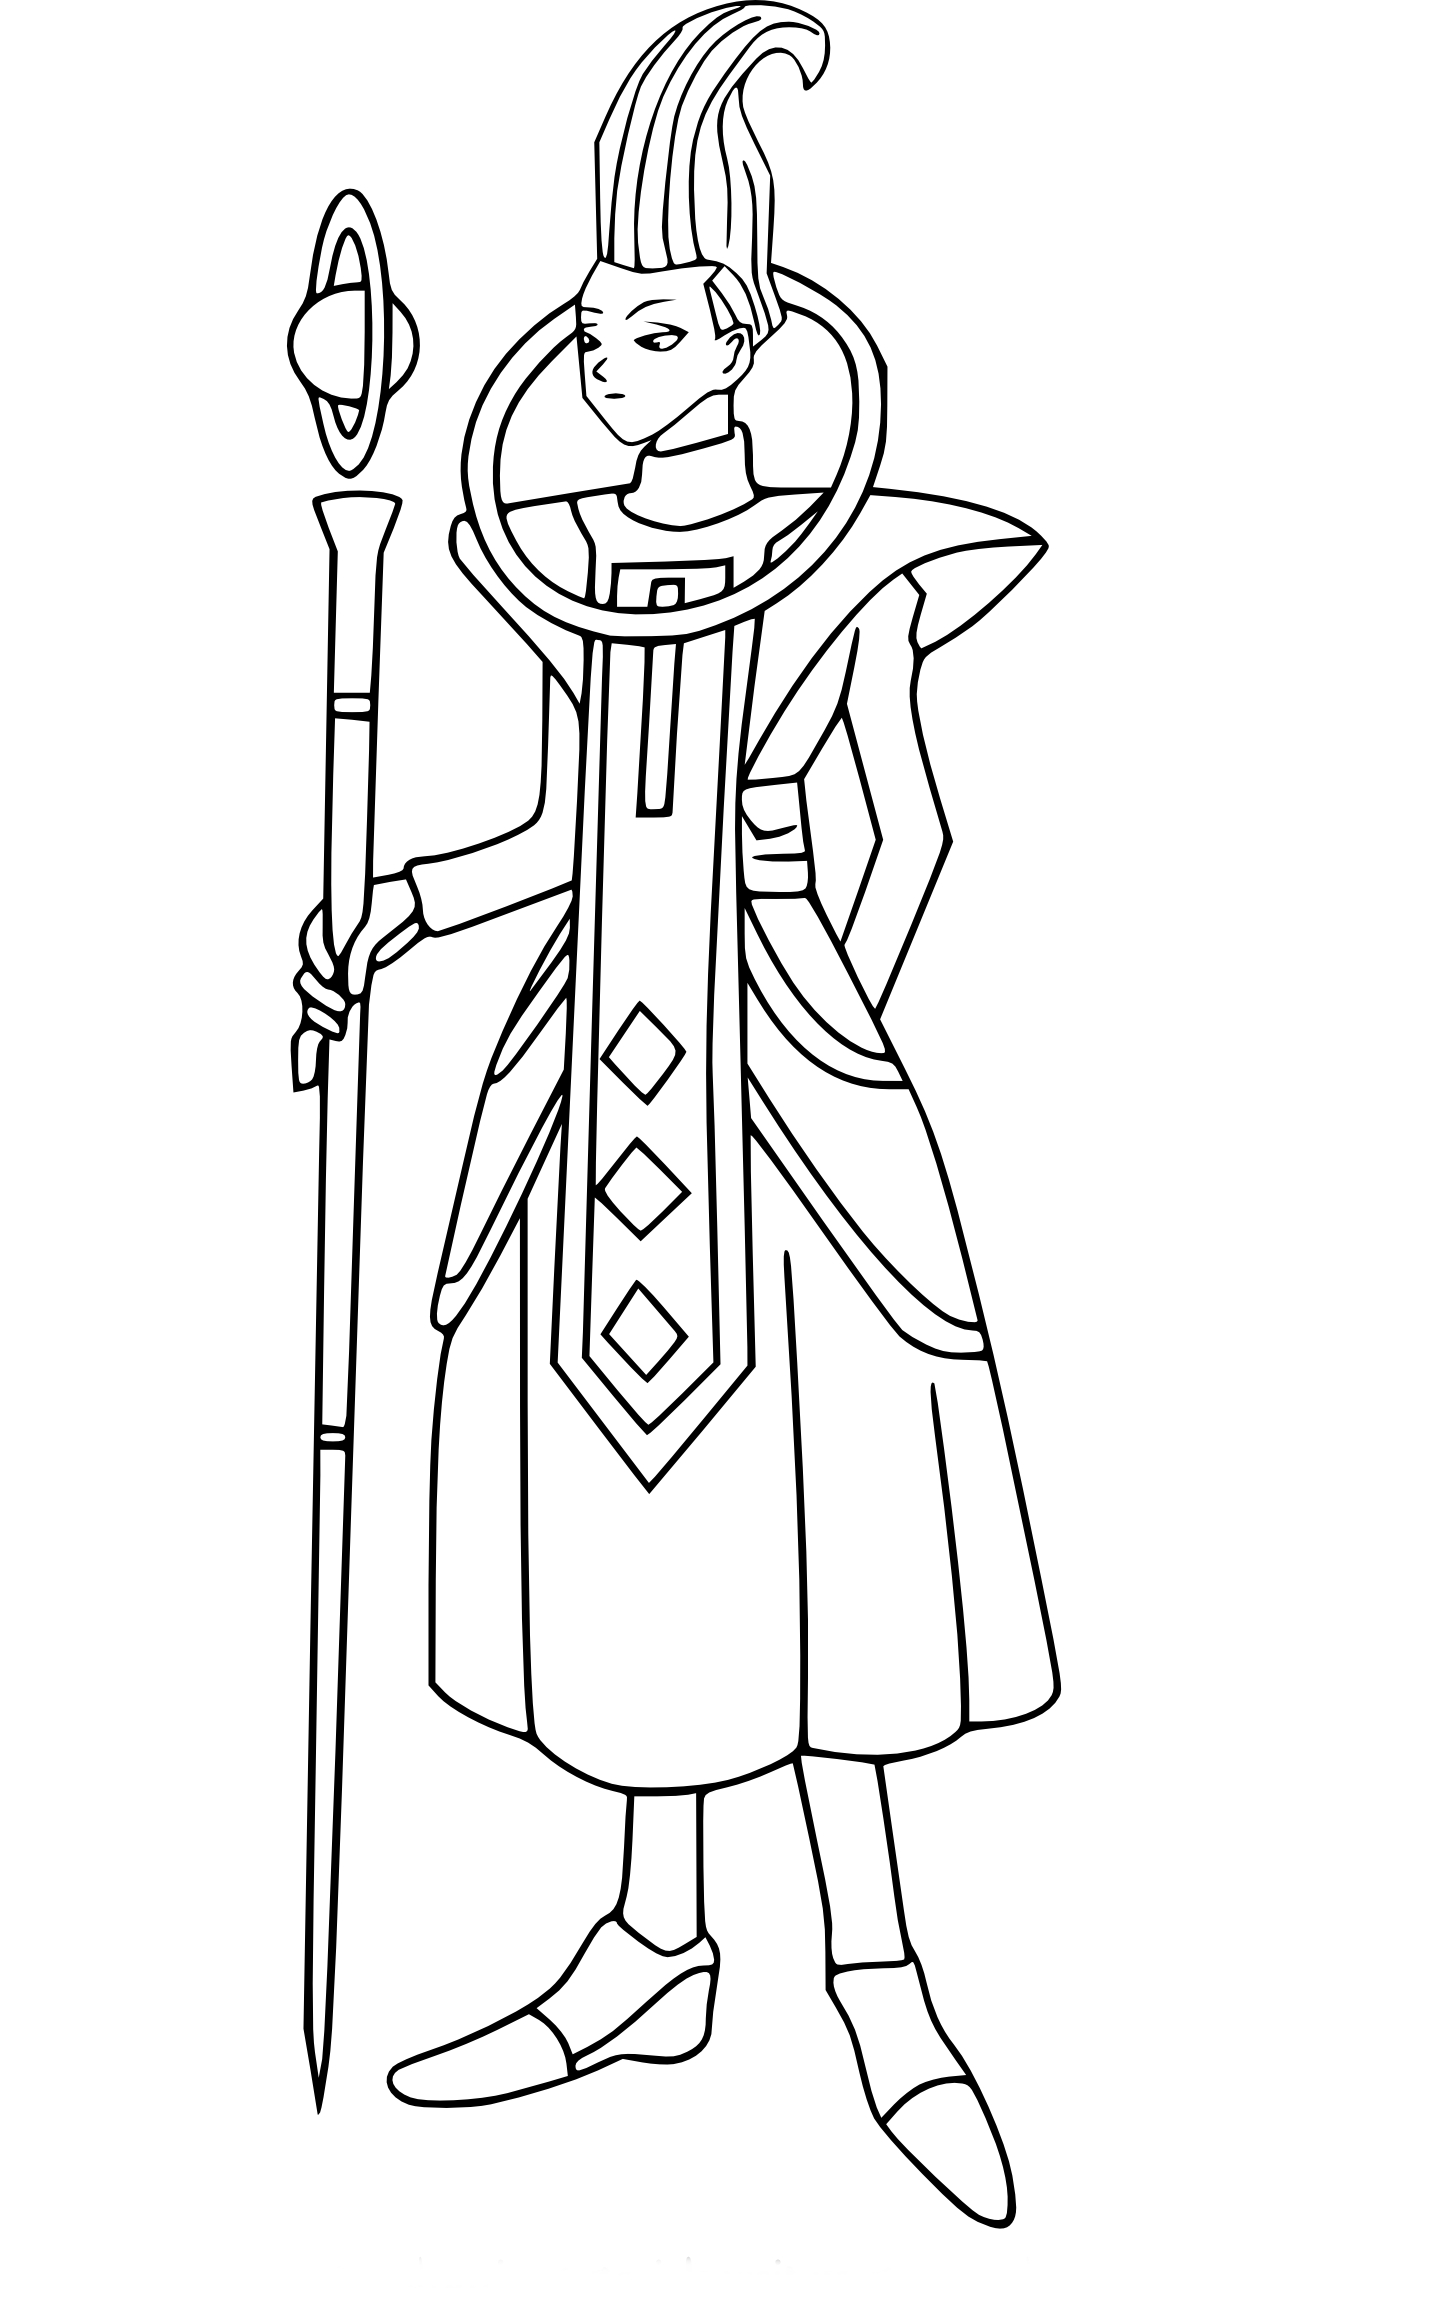 Whis Dragon Ball Z coloring page - free printable coloring pages on  coloori.com